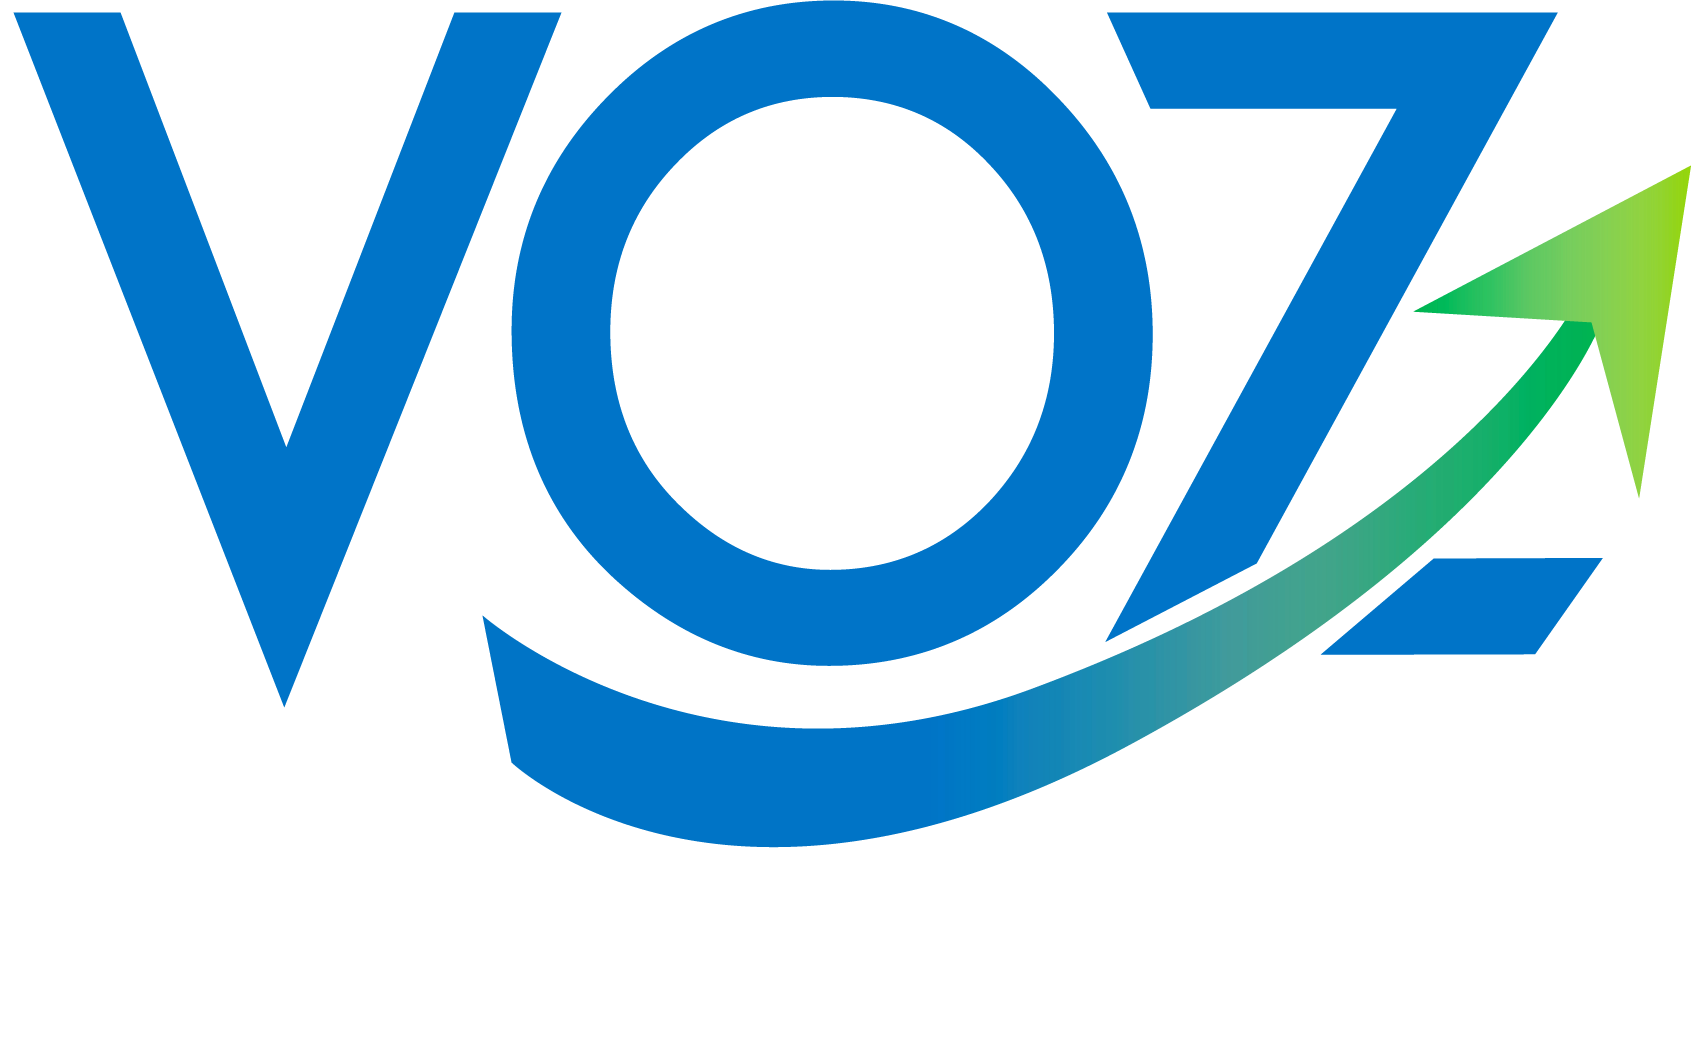 Voz Growth. Empowering businesses to propel growth.